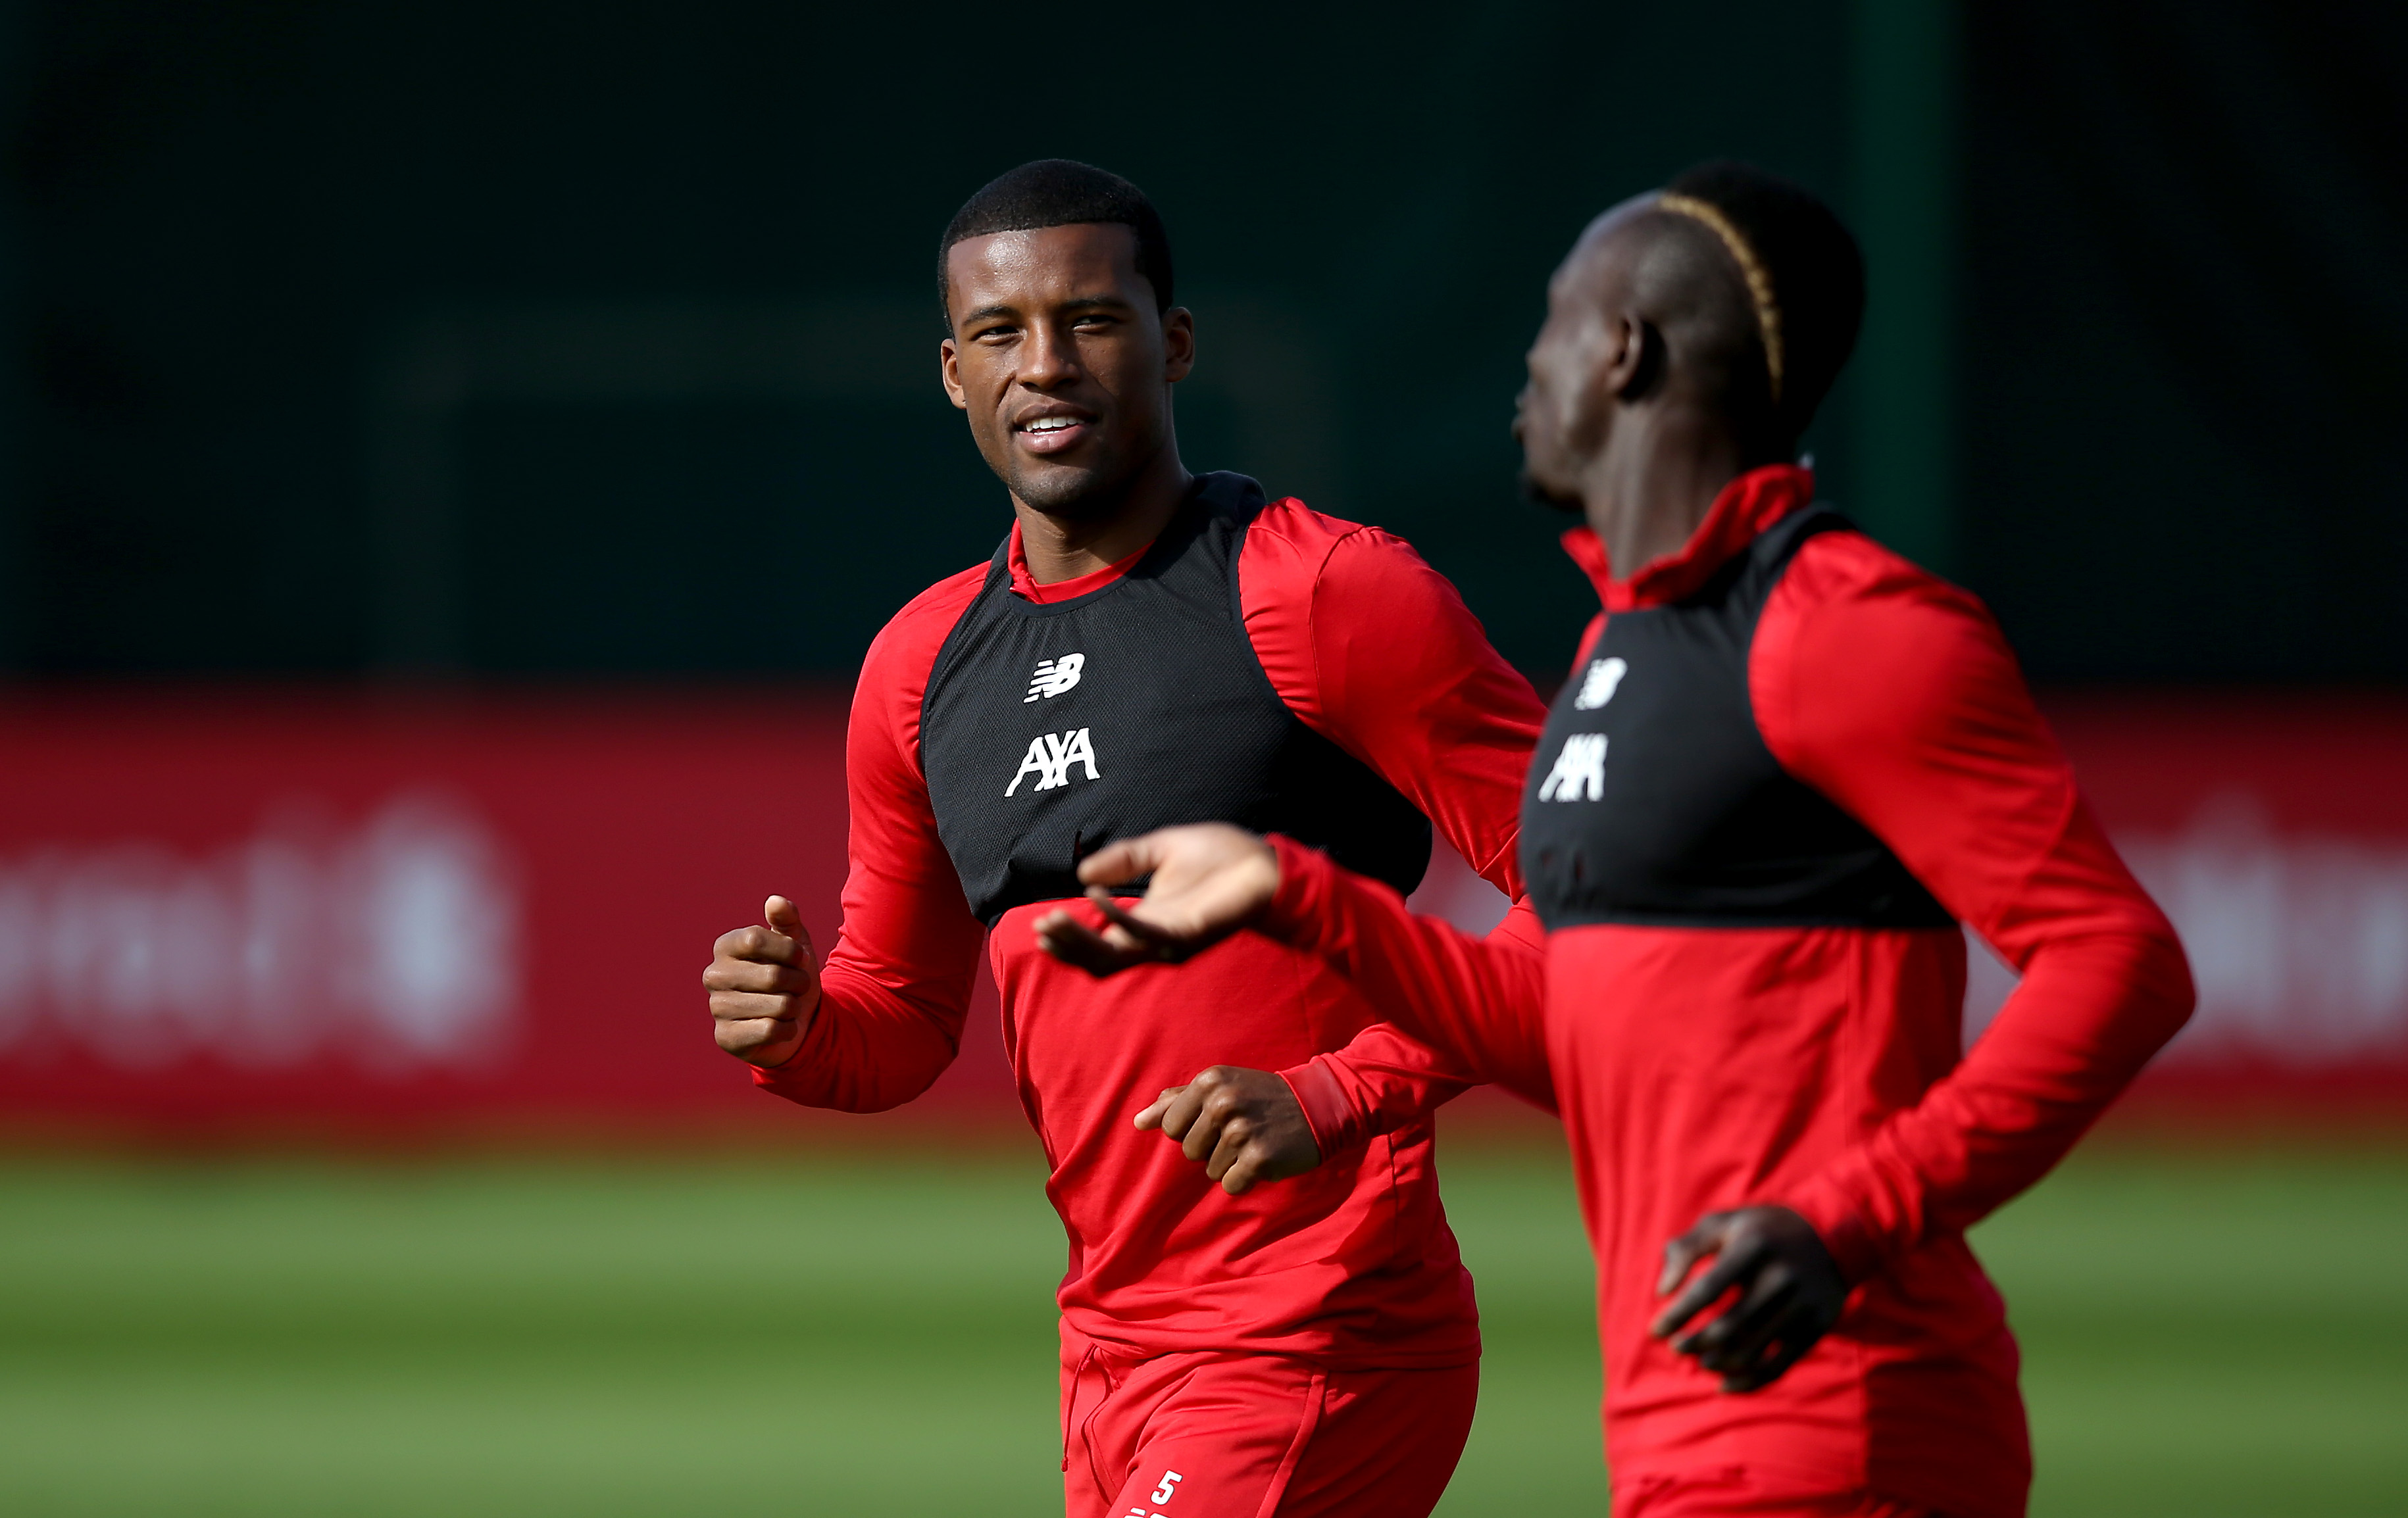 LIVERPOOL, ENGLAND - SEPTEMBER 16: Georginio Wijnaldum of Liverpool speaks to Sadio Mane of Liverpool during the Liverpool FC training session on the eve of the UEFA Champions League match between SSC Napoli and Liverpool FC at Melwood Training Ground on September 16, 2019 in Liverpool, England. (Photo by Jan Kruger/Getty Images)